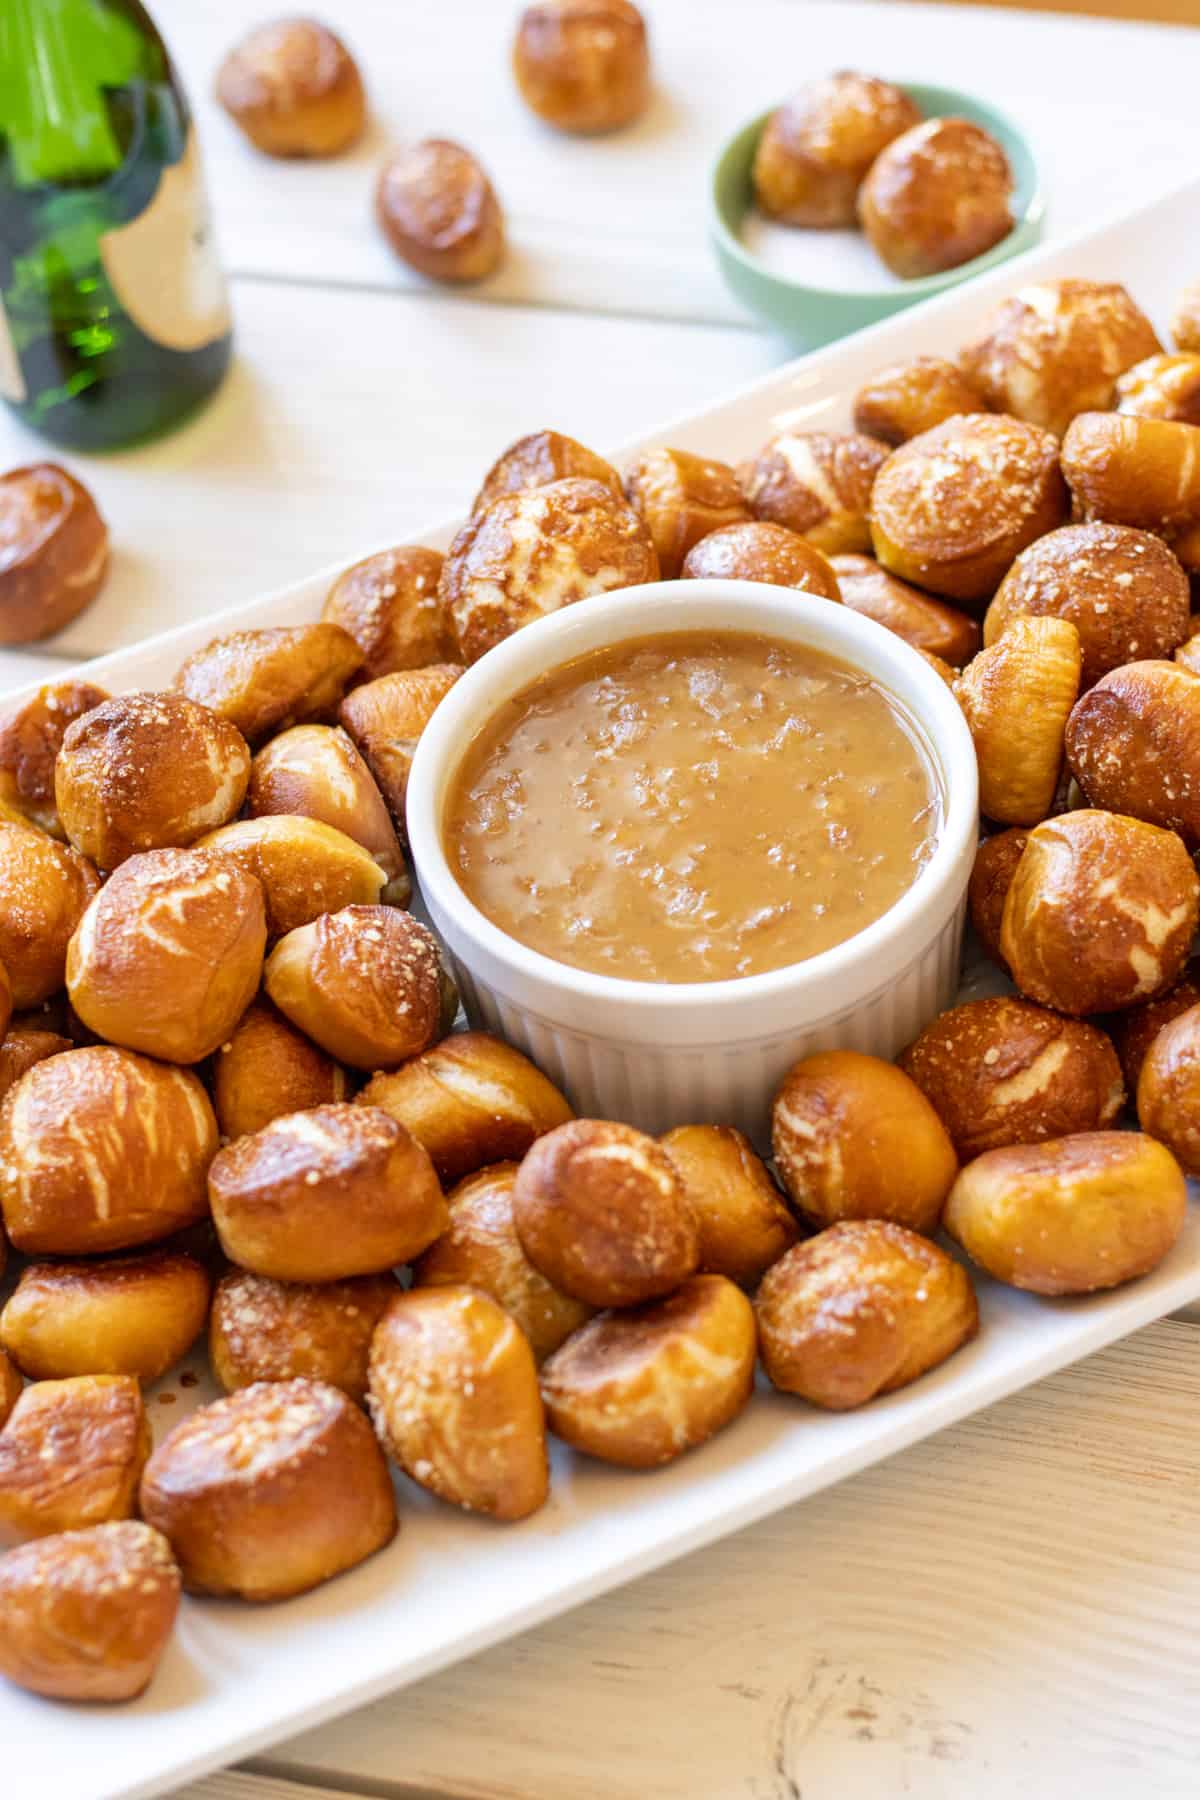 Pretzel bites on a platter with honey mustard dip and a green bottle in the background.